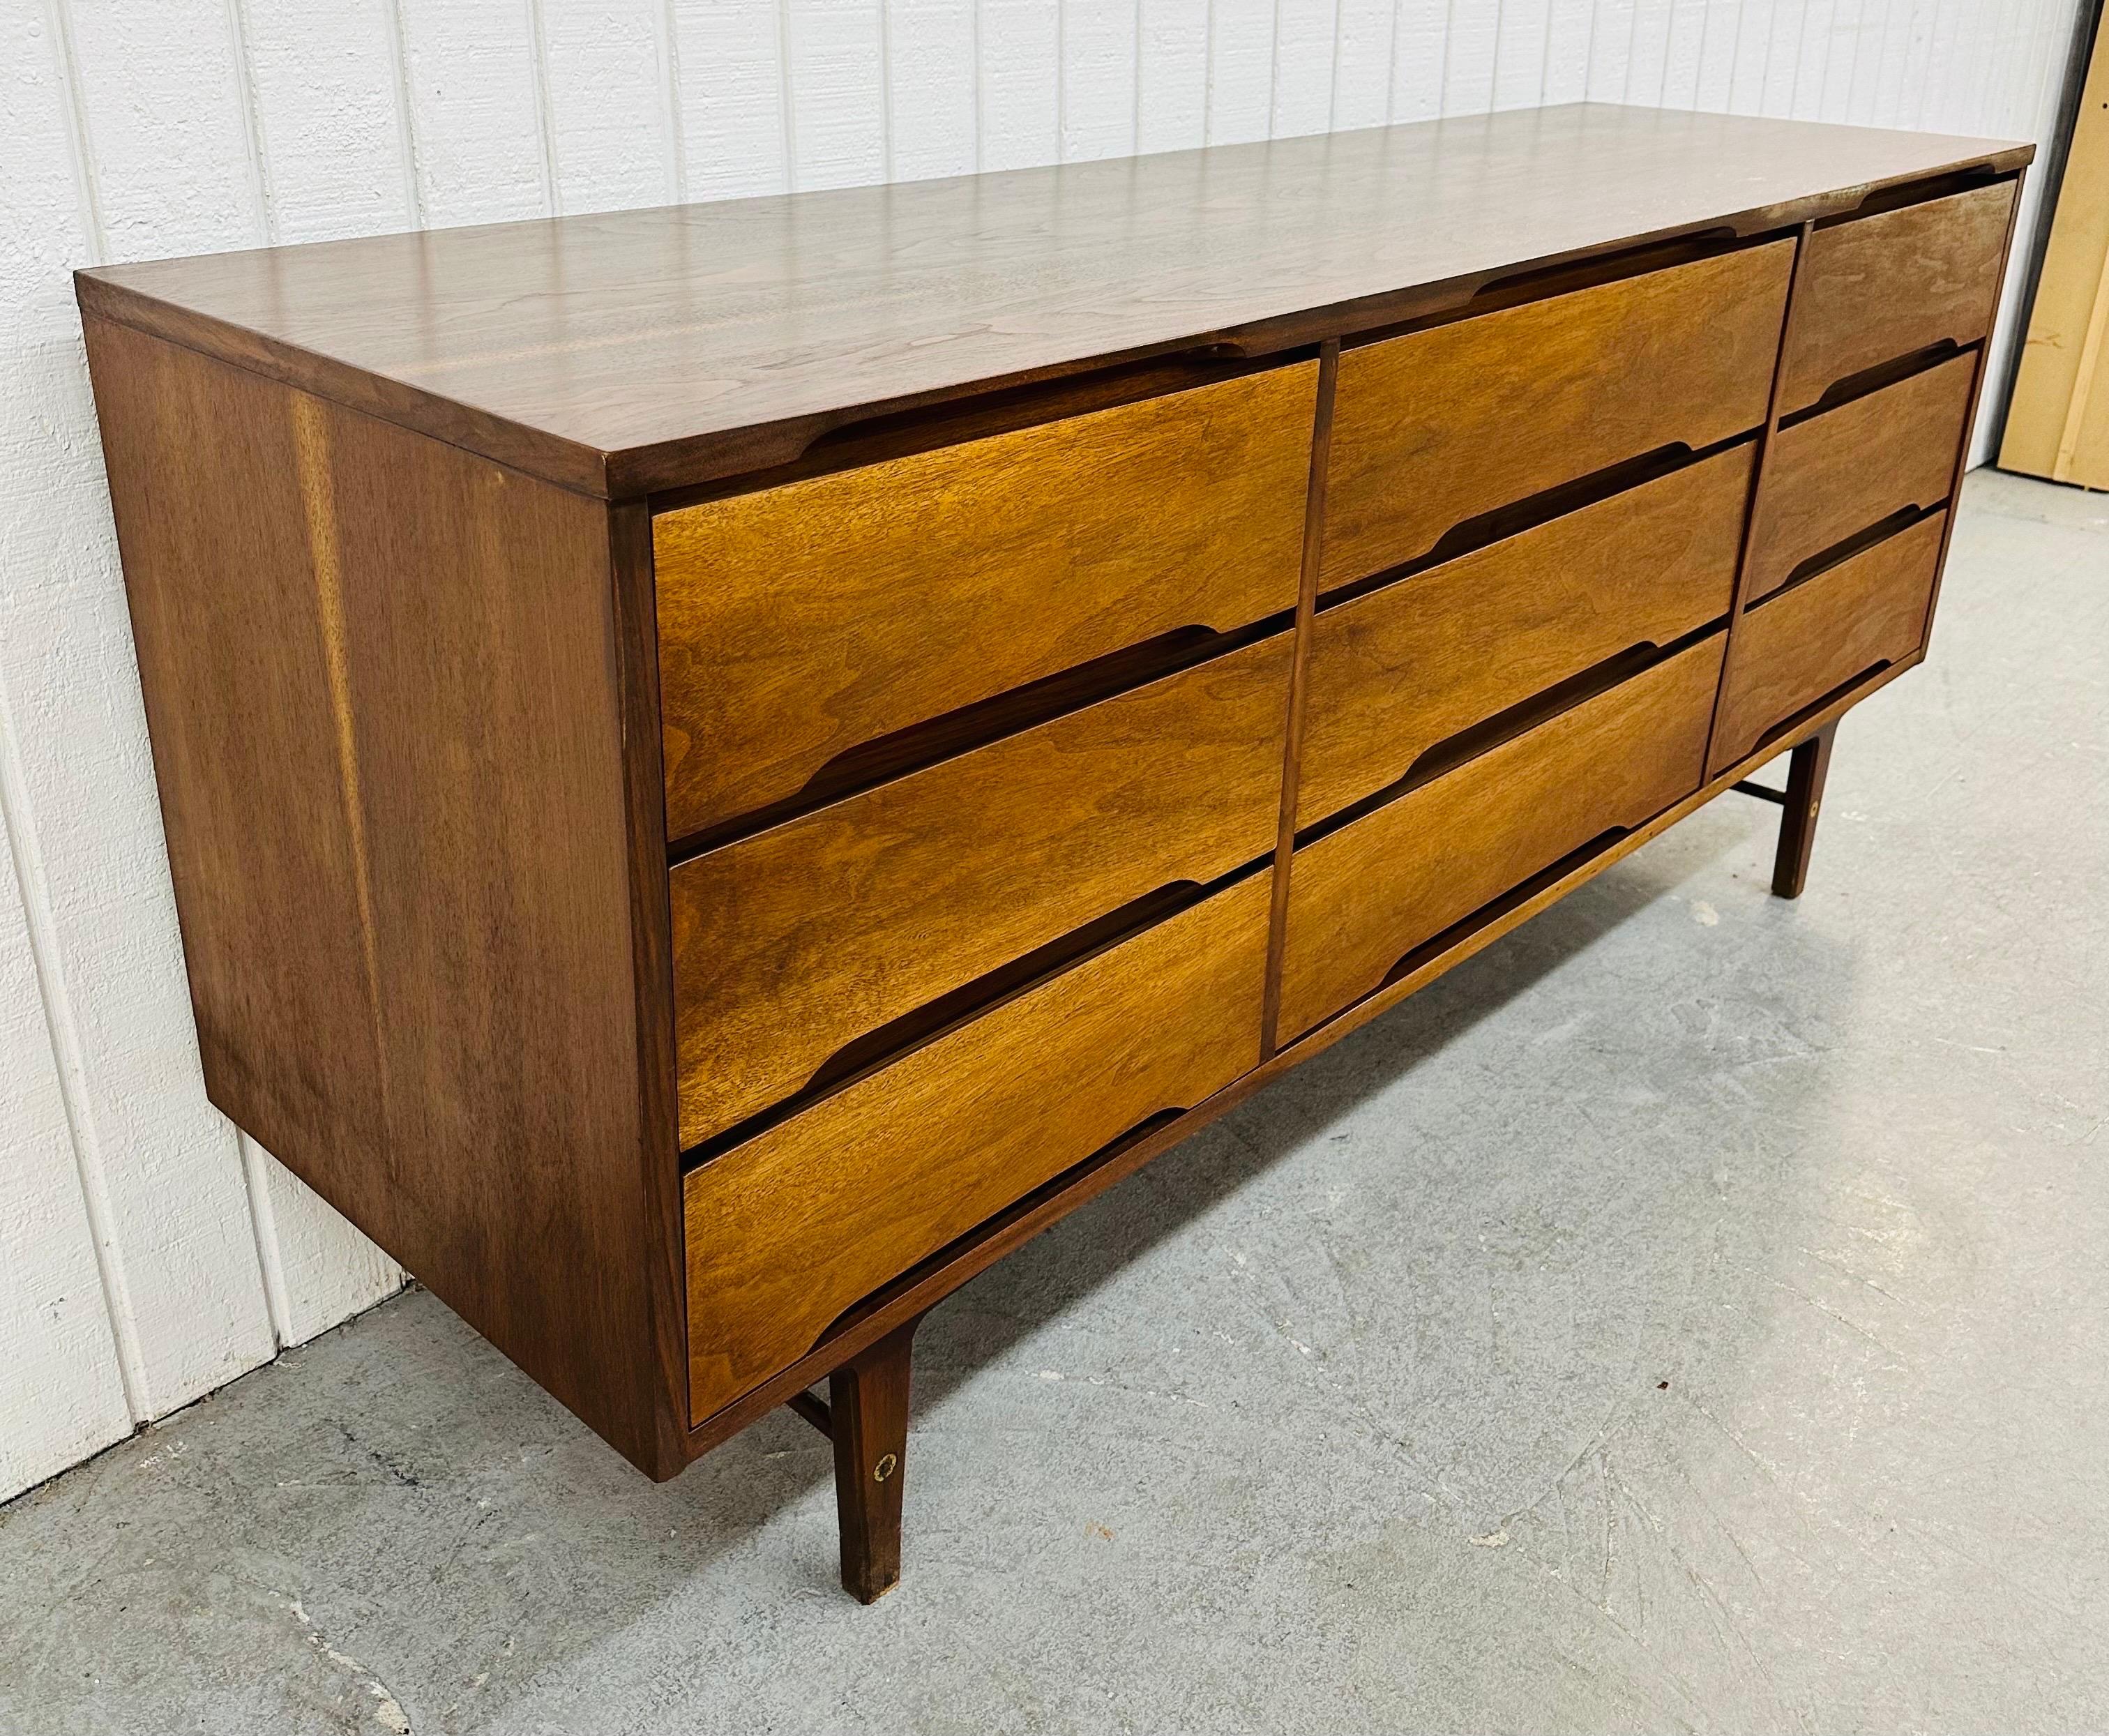 This listing is for a Mid-Century Modern Stanley 9-Drawer Walnut Dresser. Featuring a straight line design, nine equally sized drawers for storage, recessed handles for easy opening, modern legs with stretcher support, and a beautiful walnut finish.